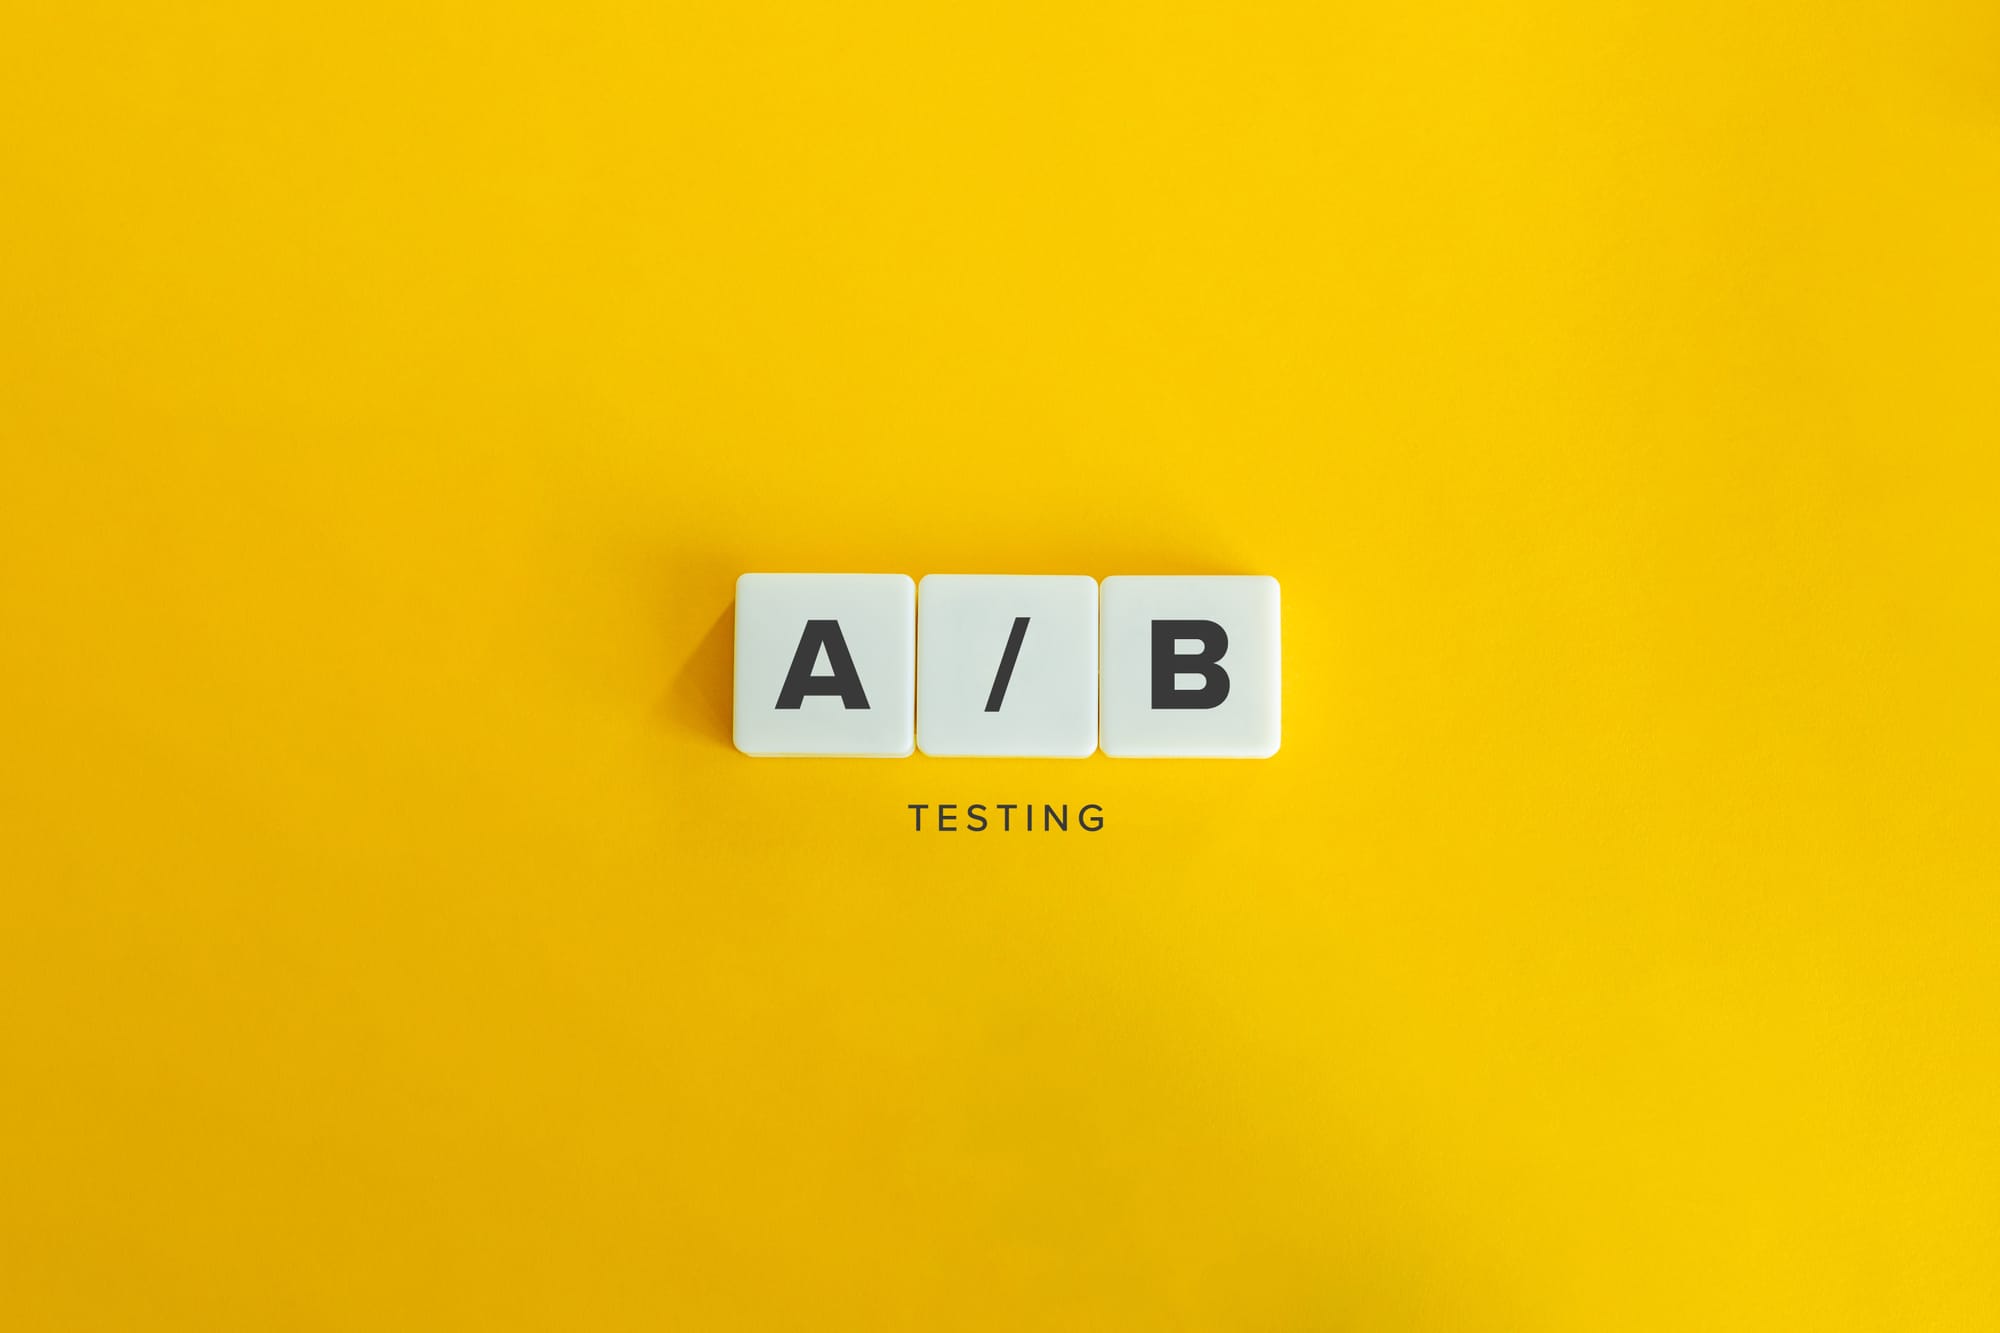 a/b email testing 